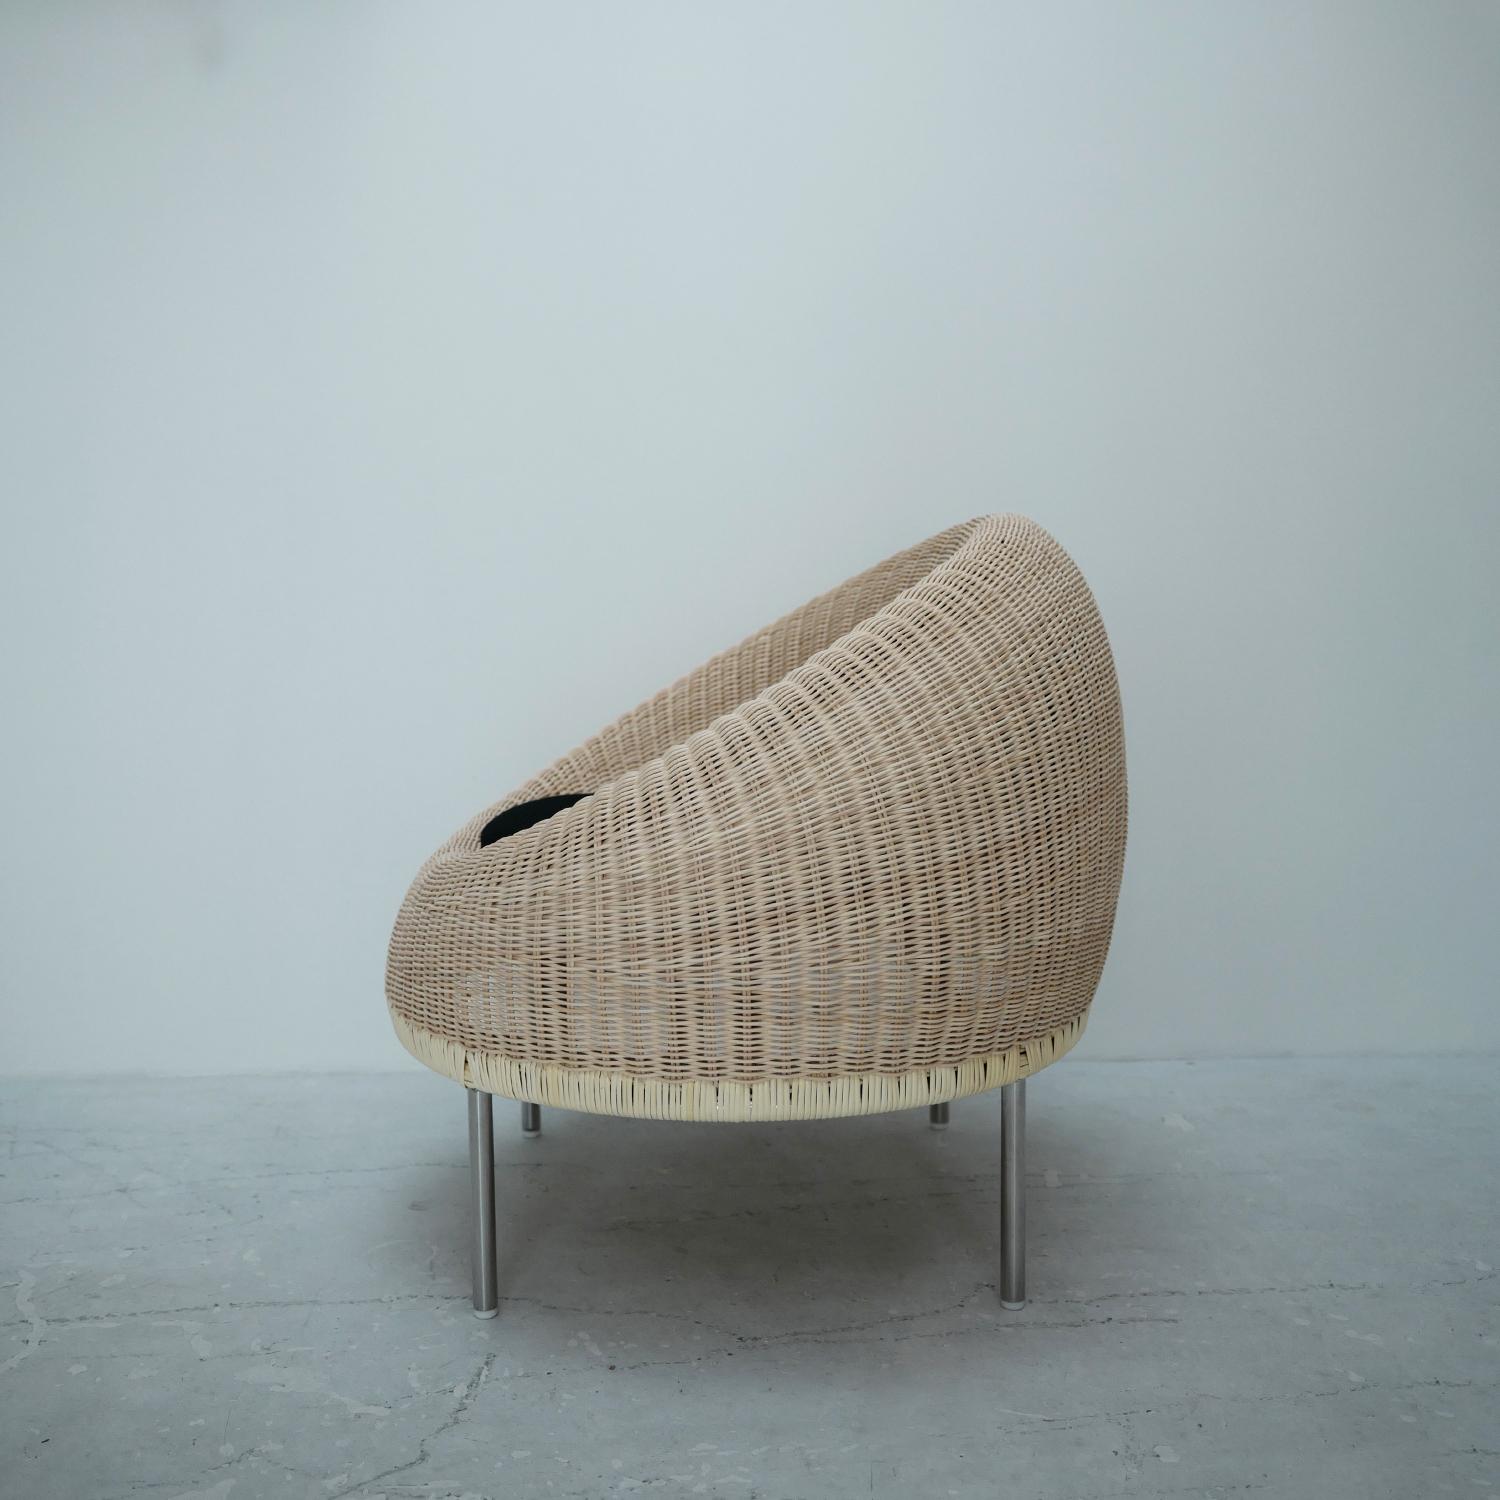 This lounge chair was introduced by Isamu Kenmochi Design Laboratory in 1960. It was designed for installation at the Otone Country Club in Japan. It is a rare piece among Isamu Kenmochi's signature rattan series, in which iron is used for the legs.